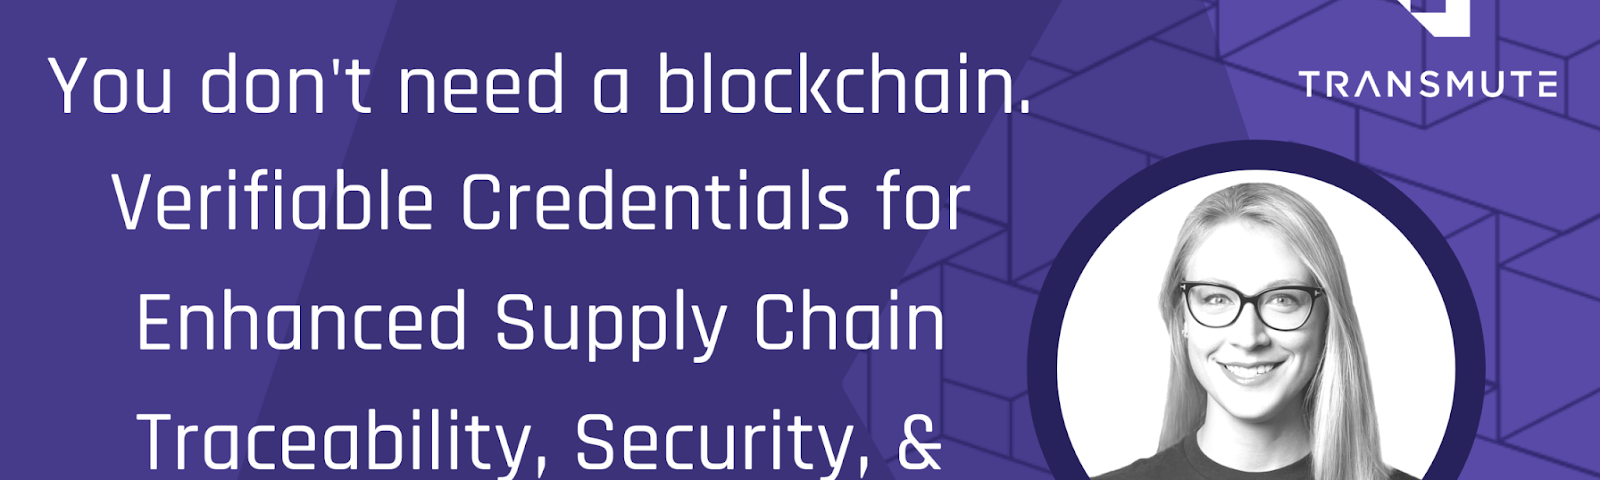 Title card for the blog in Transmute purple branding with a headshot of Transmute CEO Karyl Fowler: “You don’t need a blockchain. Verifiable Credentials for Enhanced Supply Chain Traceability, Security, & Resilience” by Karyl Fowler.